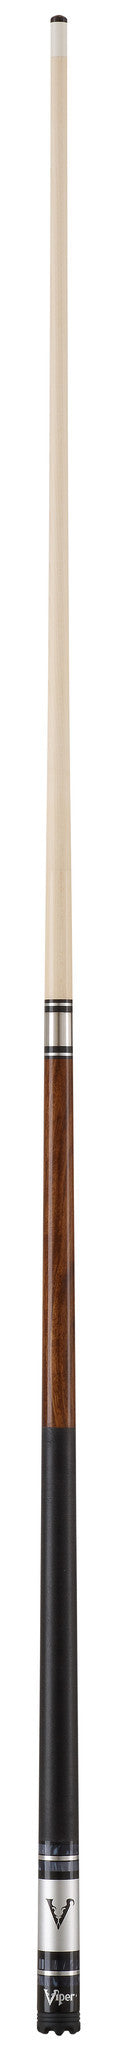 Viper Sinister Series Cue